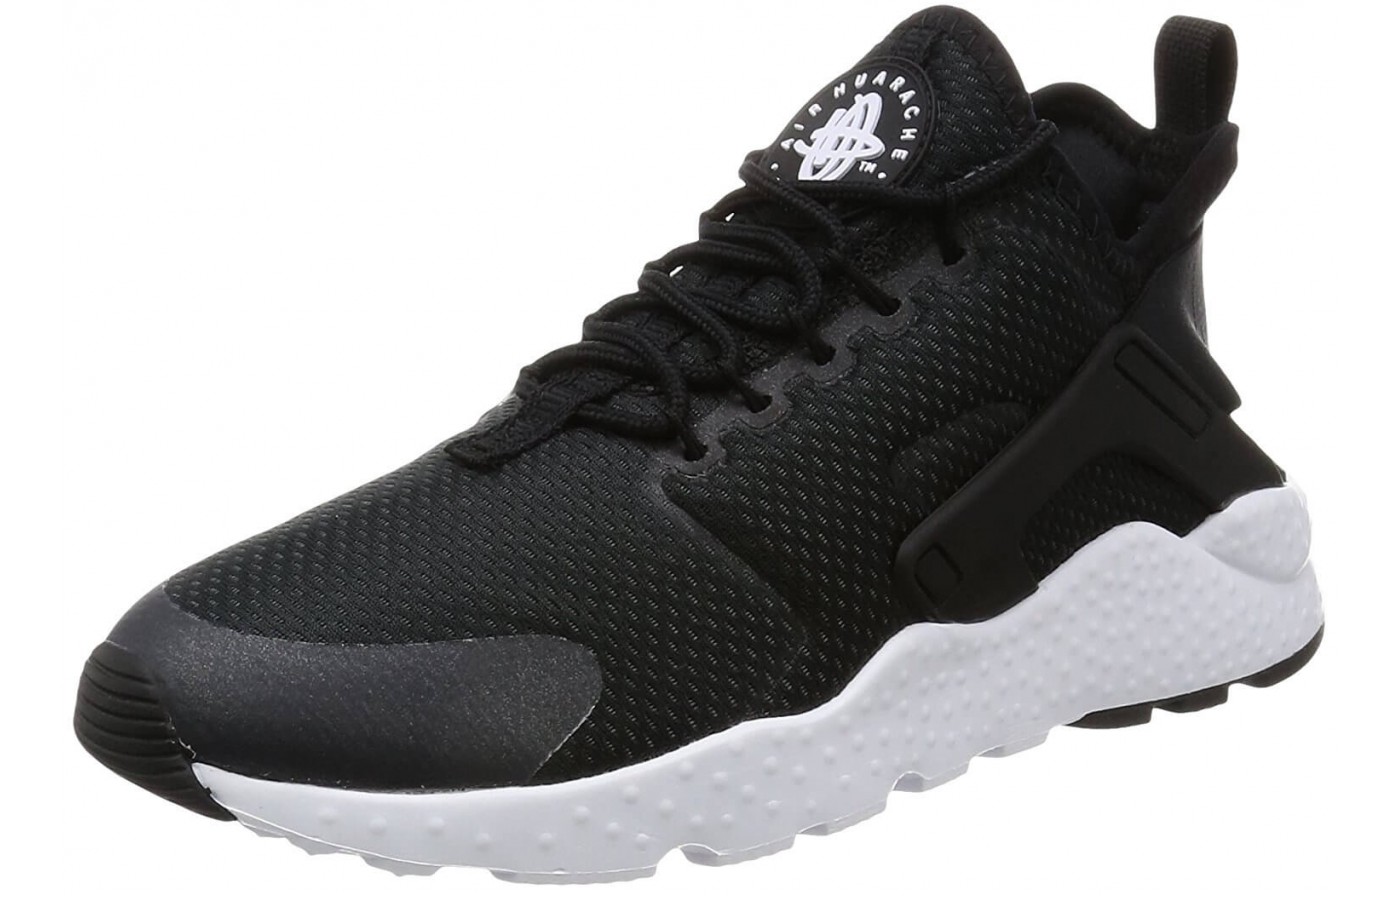 Although the Nike Air Huarache Ultra has a slight heel drop, it is much less than that of traditional running shoes.